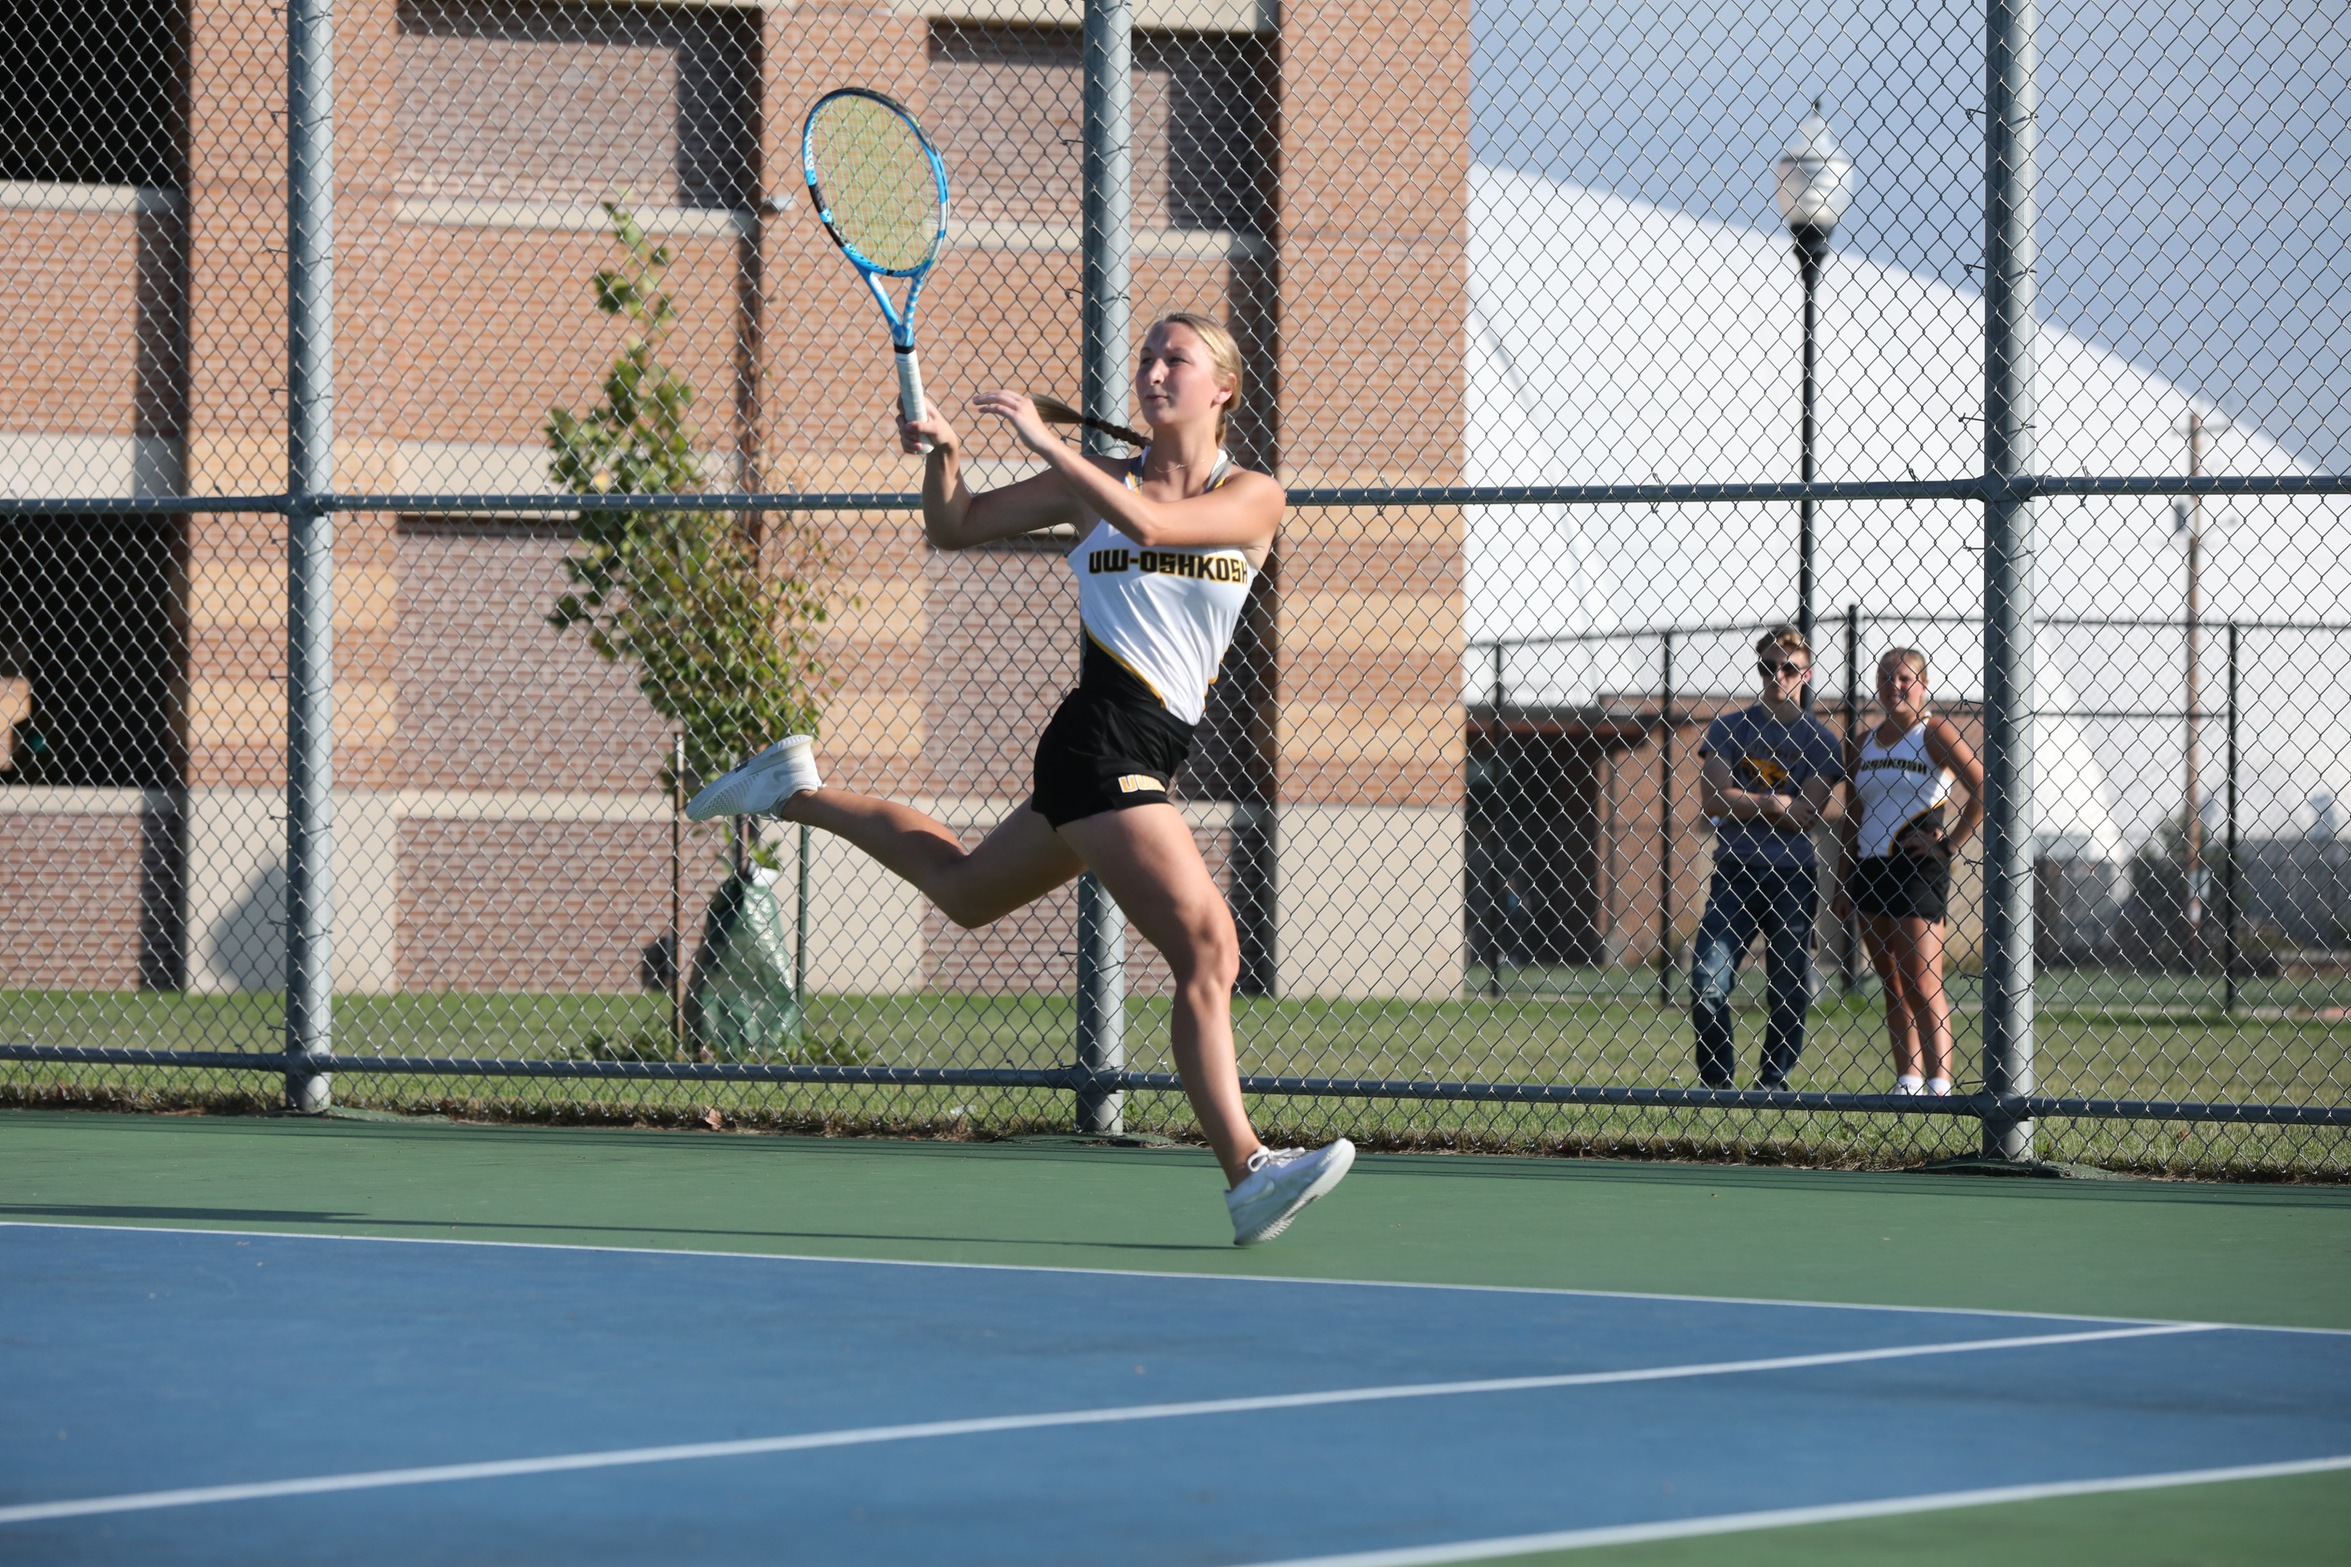 Jenna Nolde won her singles match and paired with Courtney Carpenter to win in doubles against St. Norbert College.